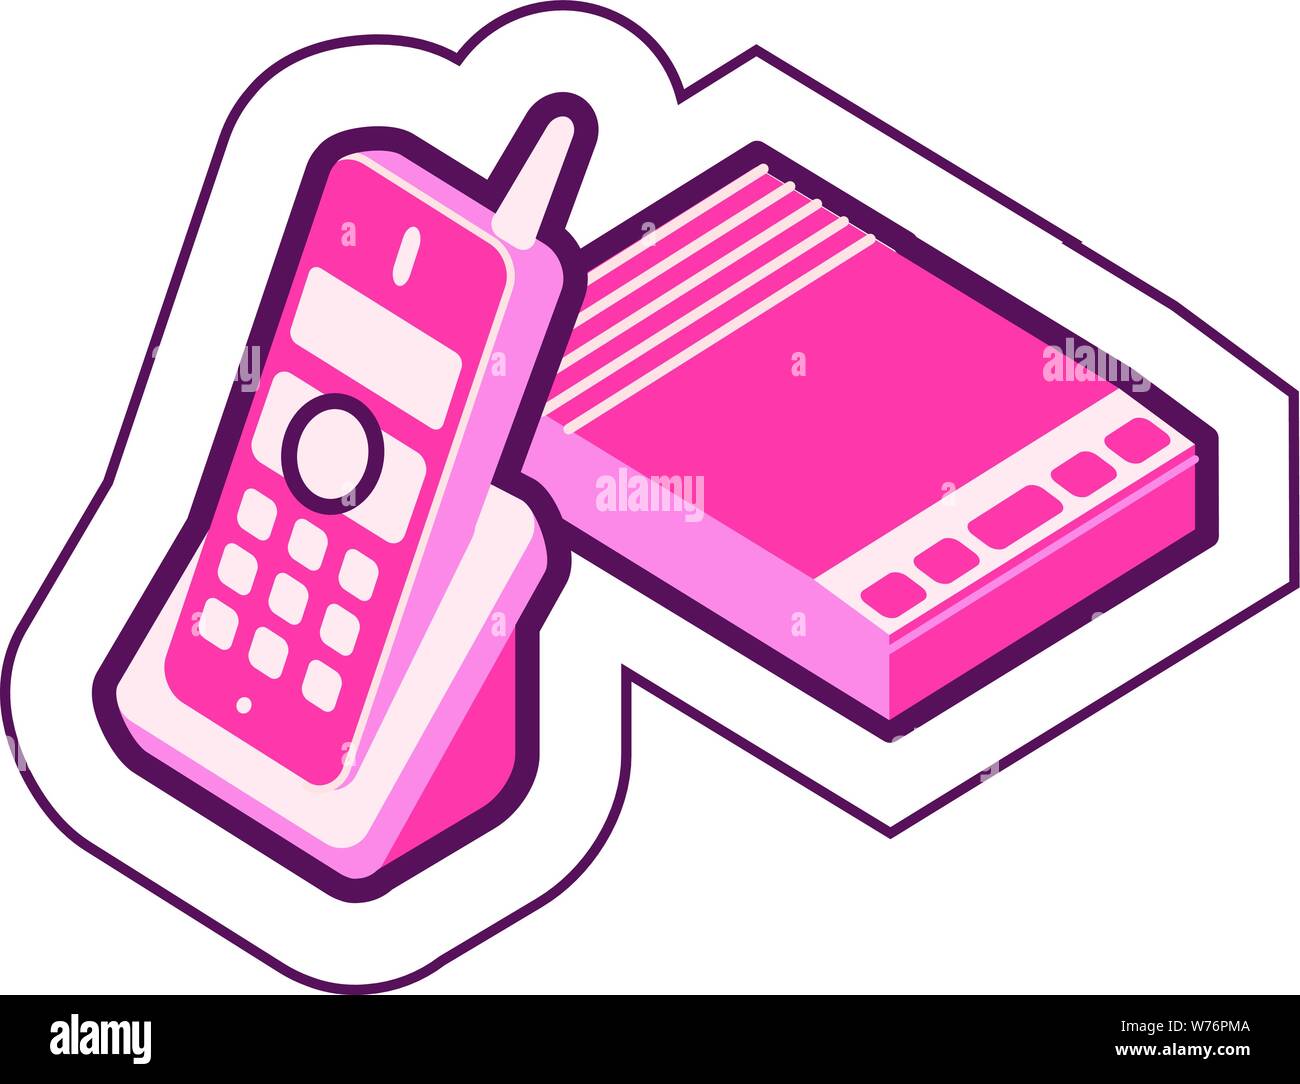 conic landline telephone & answering machine system graphic with